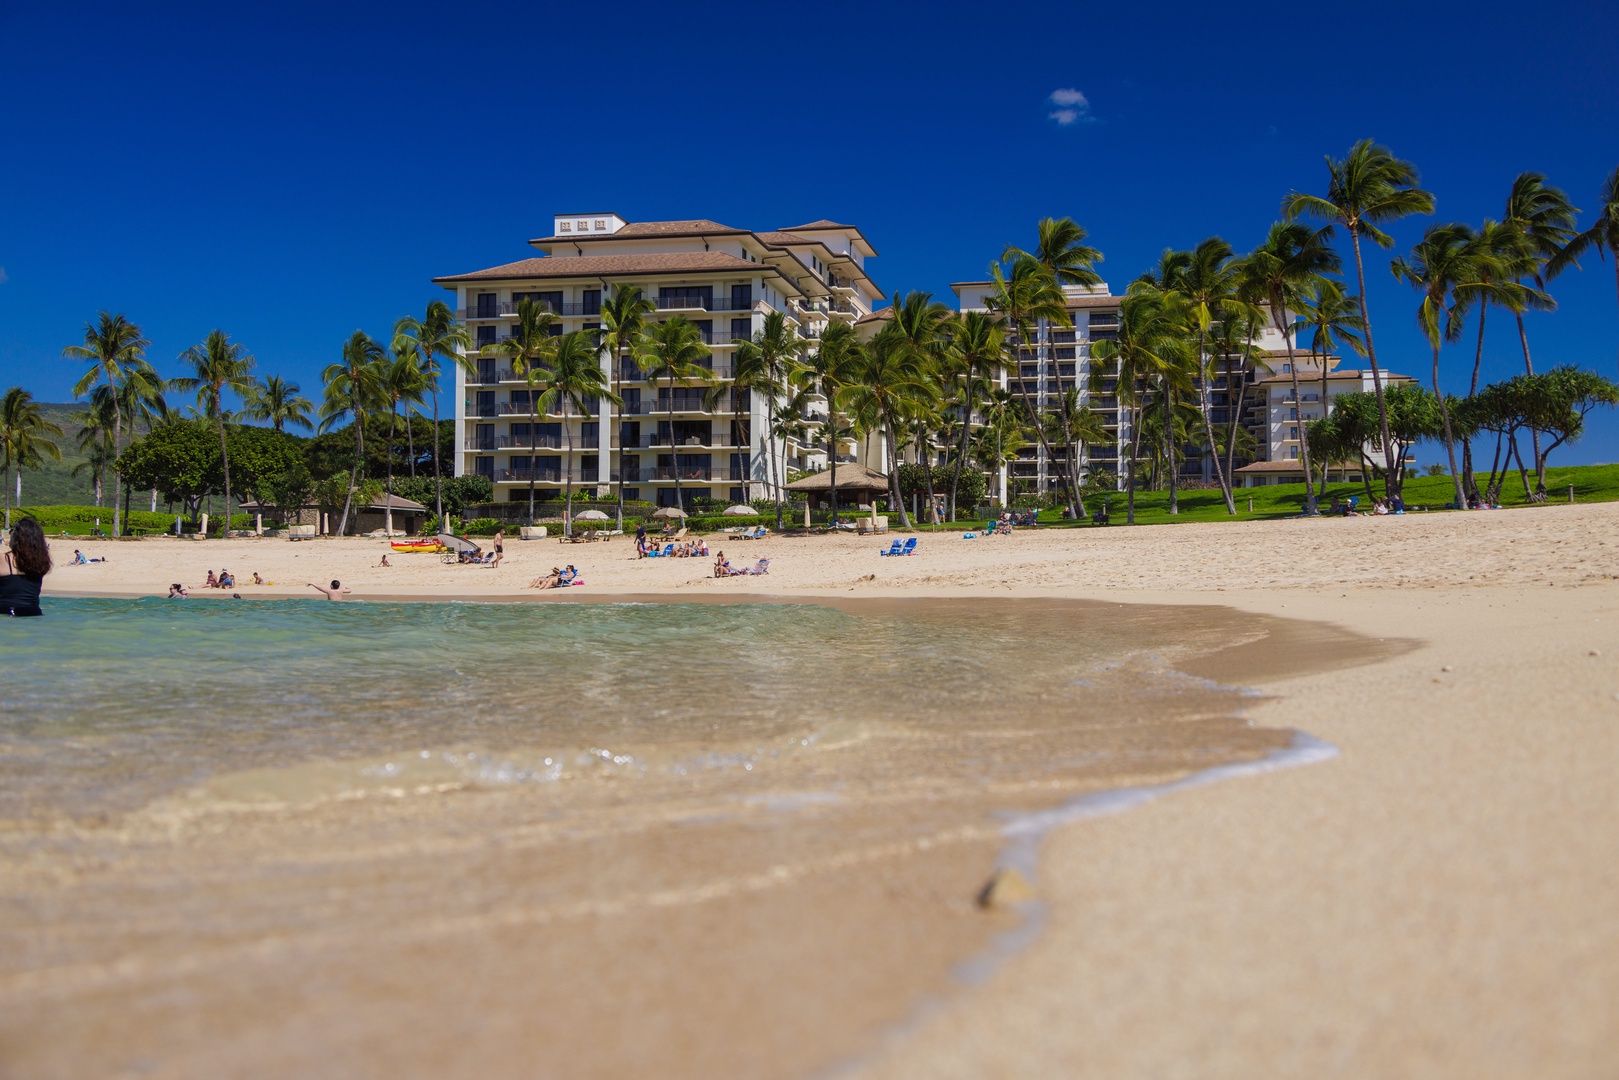 Kapolei Vacation Rentals, Ko Olina Kai 1027A - The private lagoon at Ko Olina is the perfect place for a relaxing afternoon in the sun.